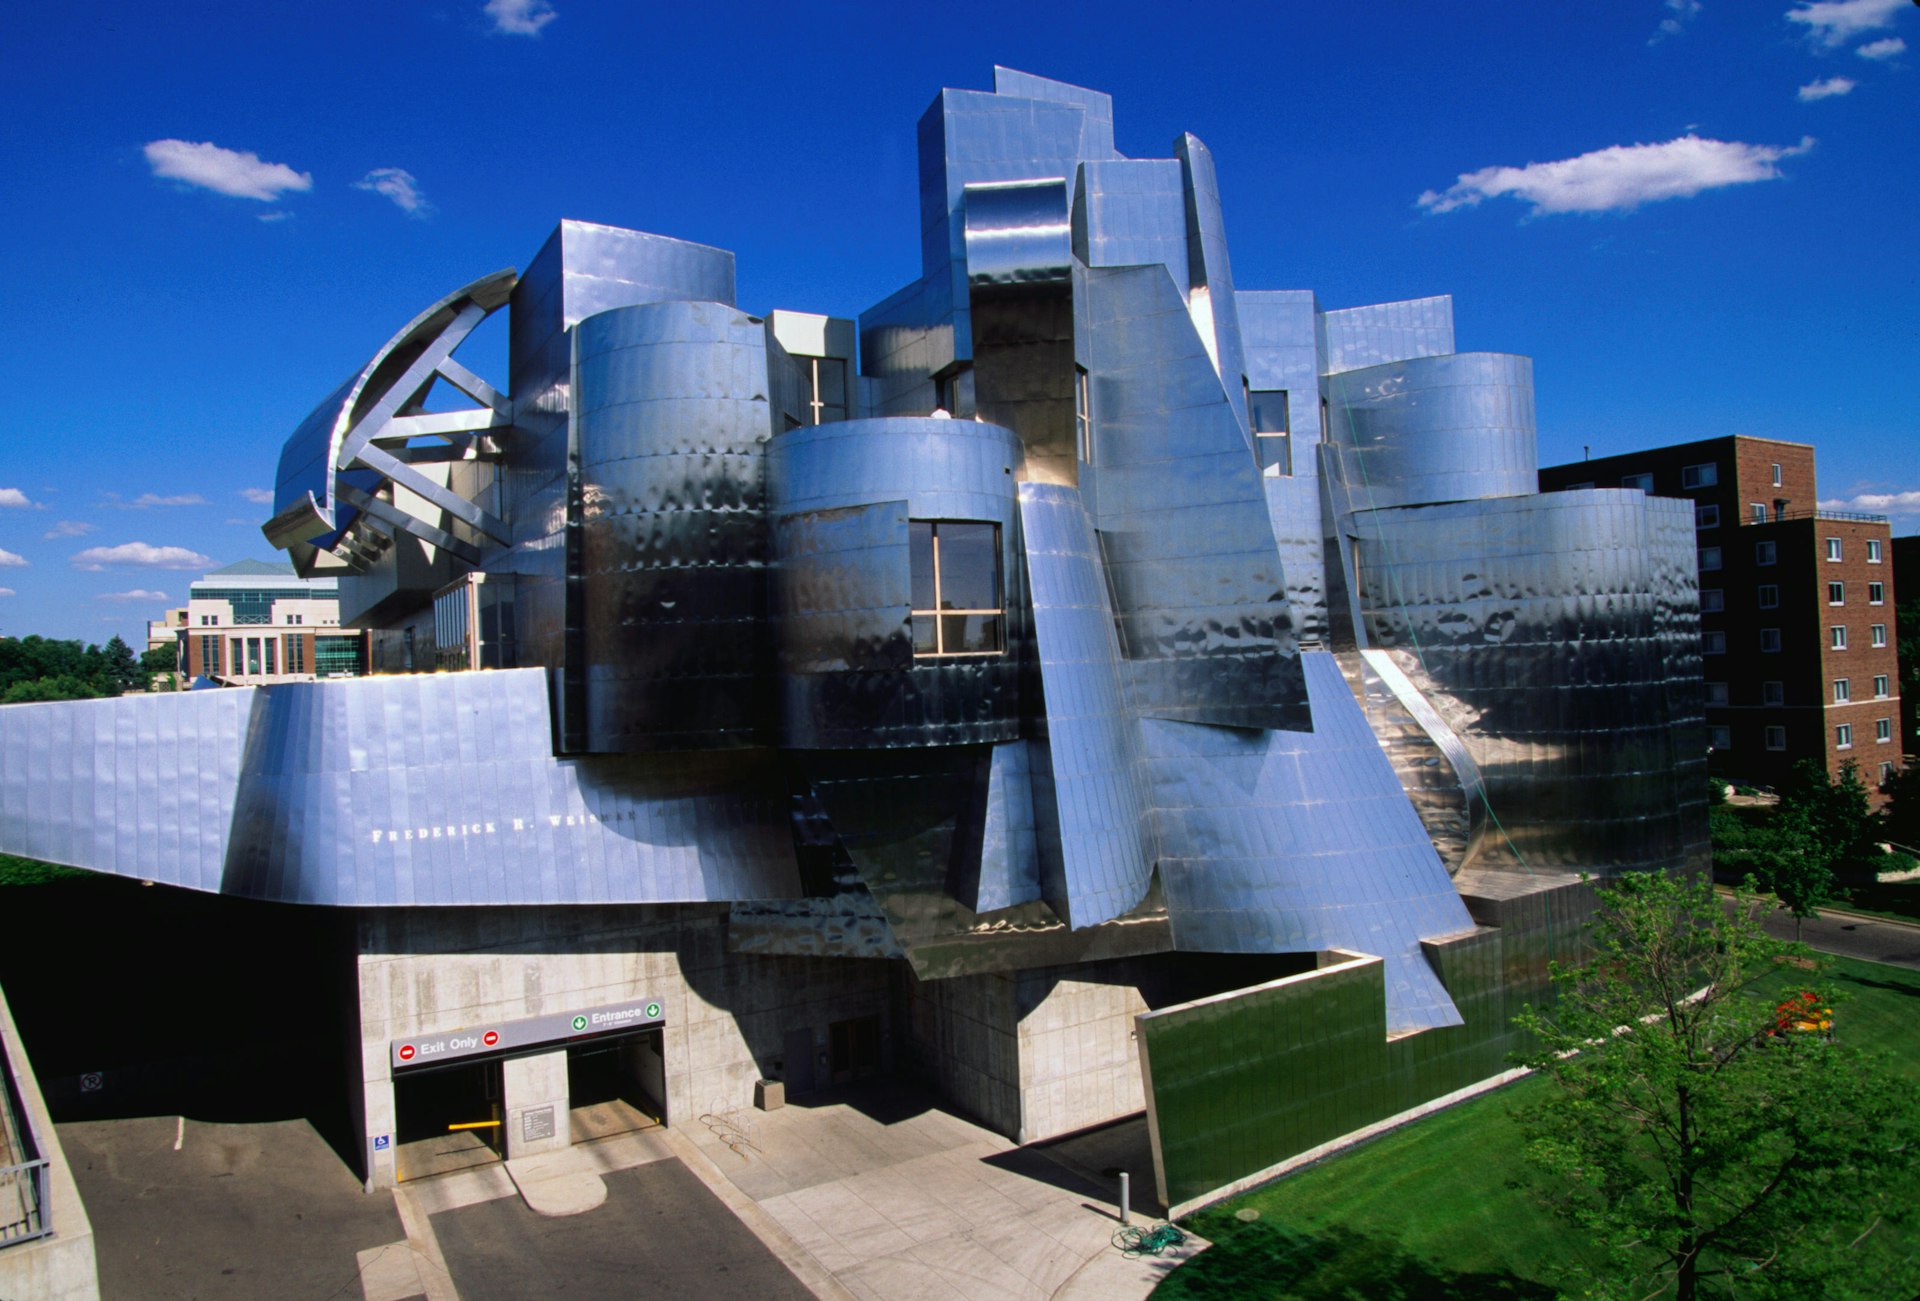 The gleaming exterior of the Weisman Art Museum by architect Frank Gehry